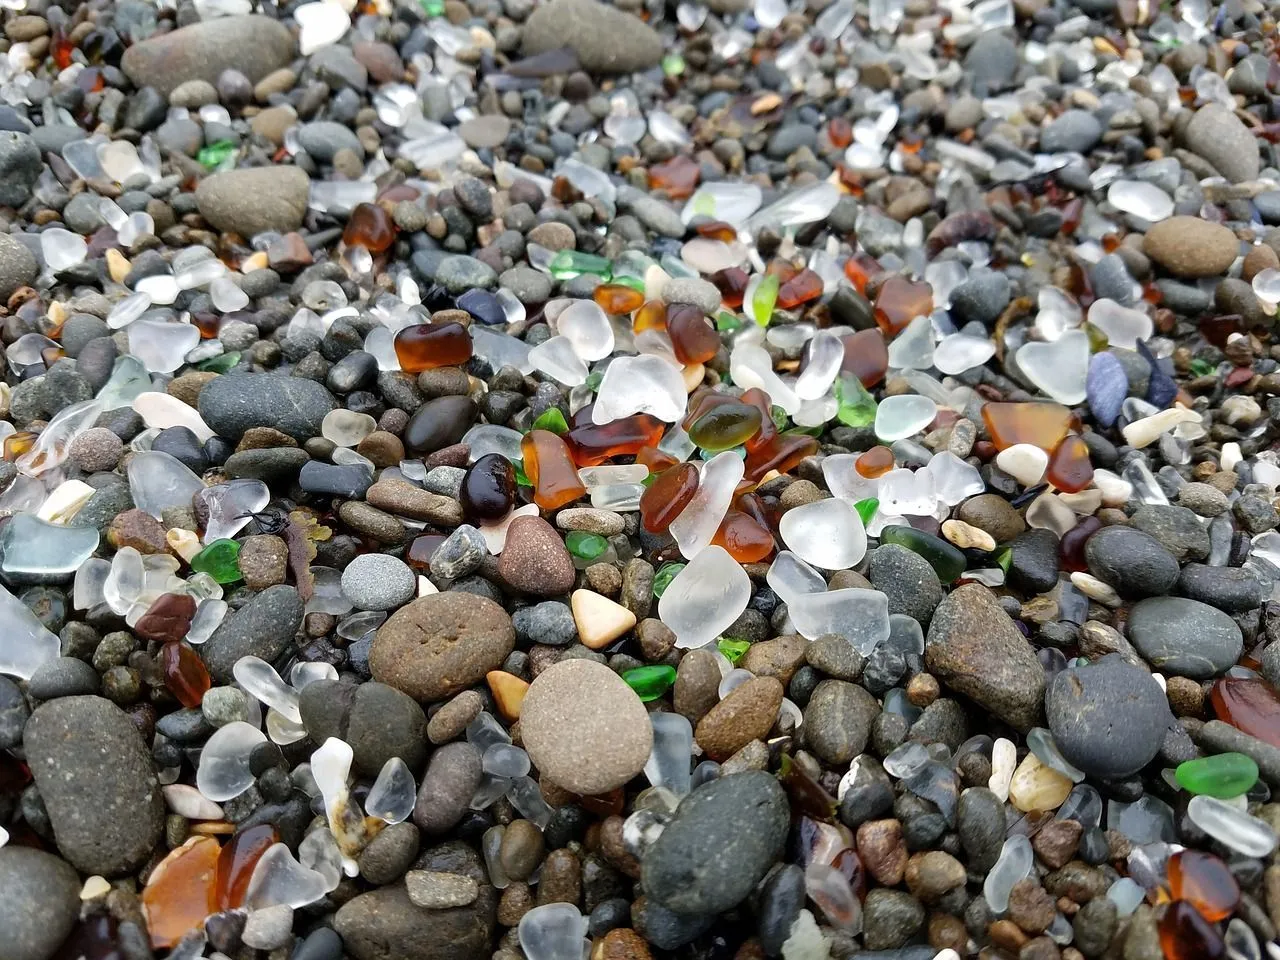 Read some Glass Beach, California facts to know about this spectacular place in the city of Fort Bragg!